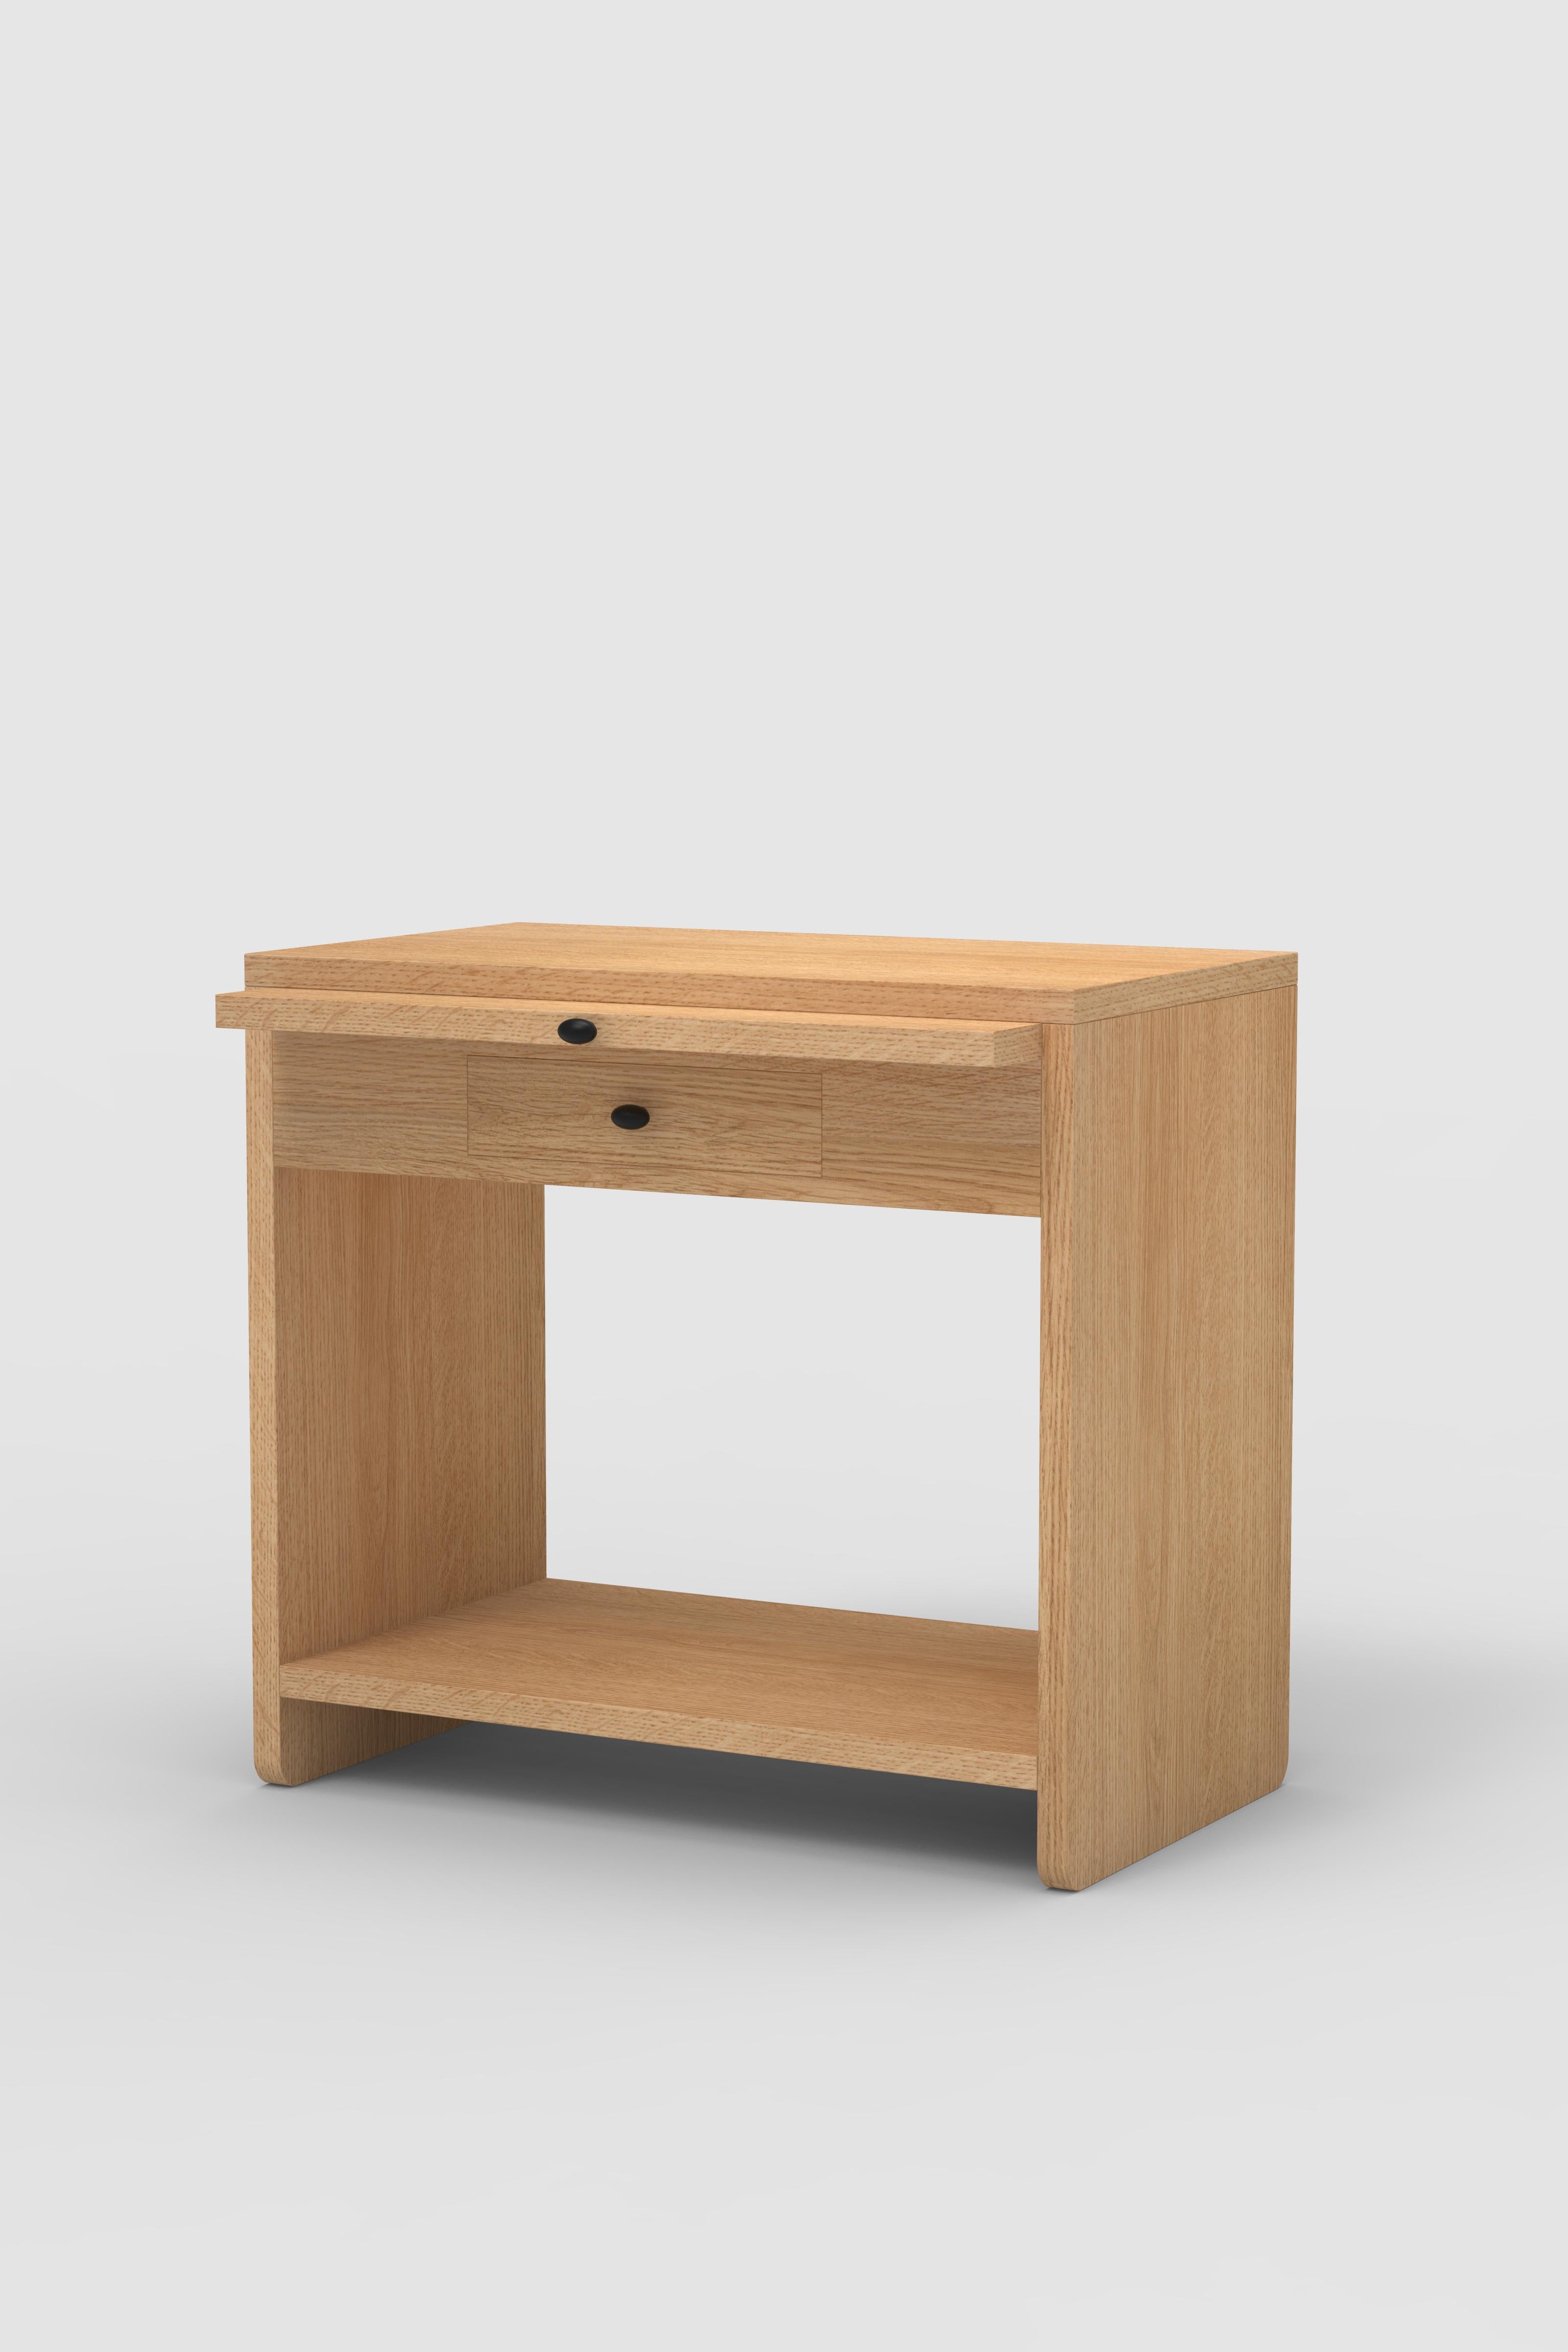 Orphan work 200 bedside
Shown in oak.
Available in natural oak. 
Measures: 28” W x 16” D x 26” H
small drawer 12